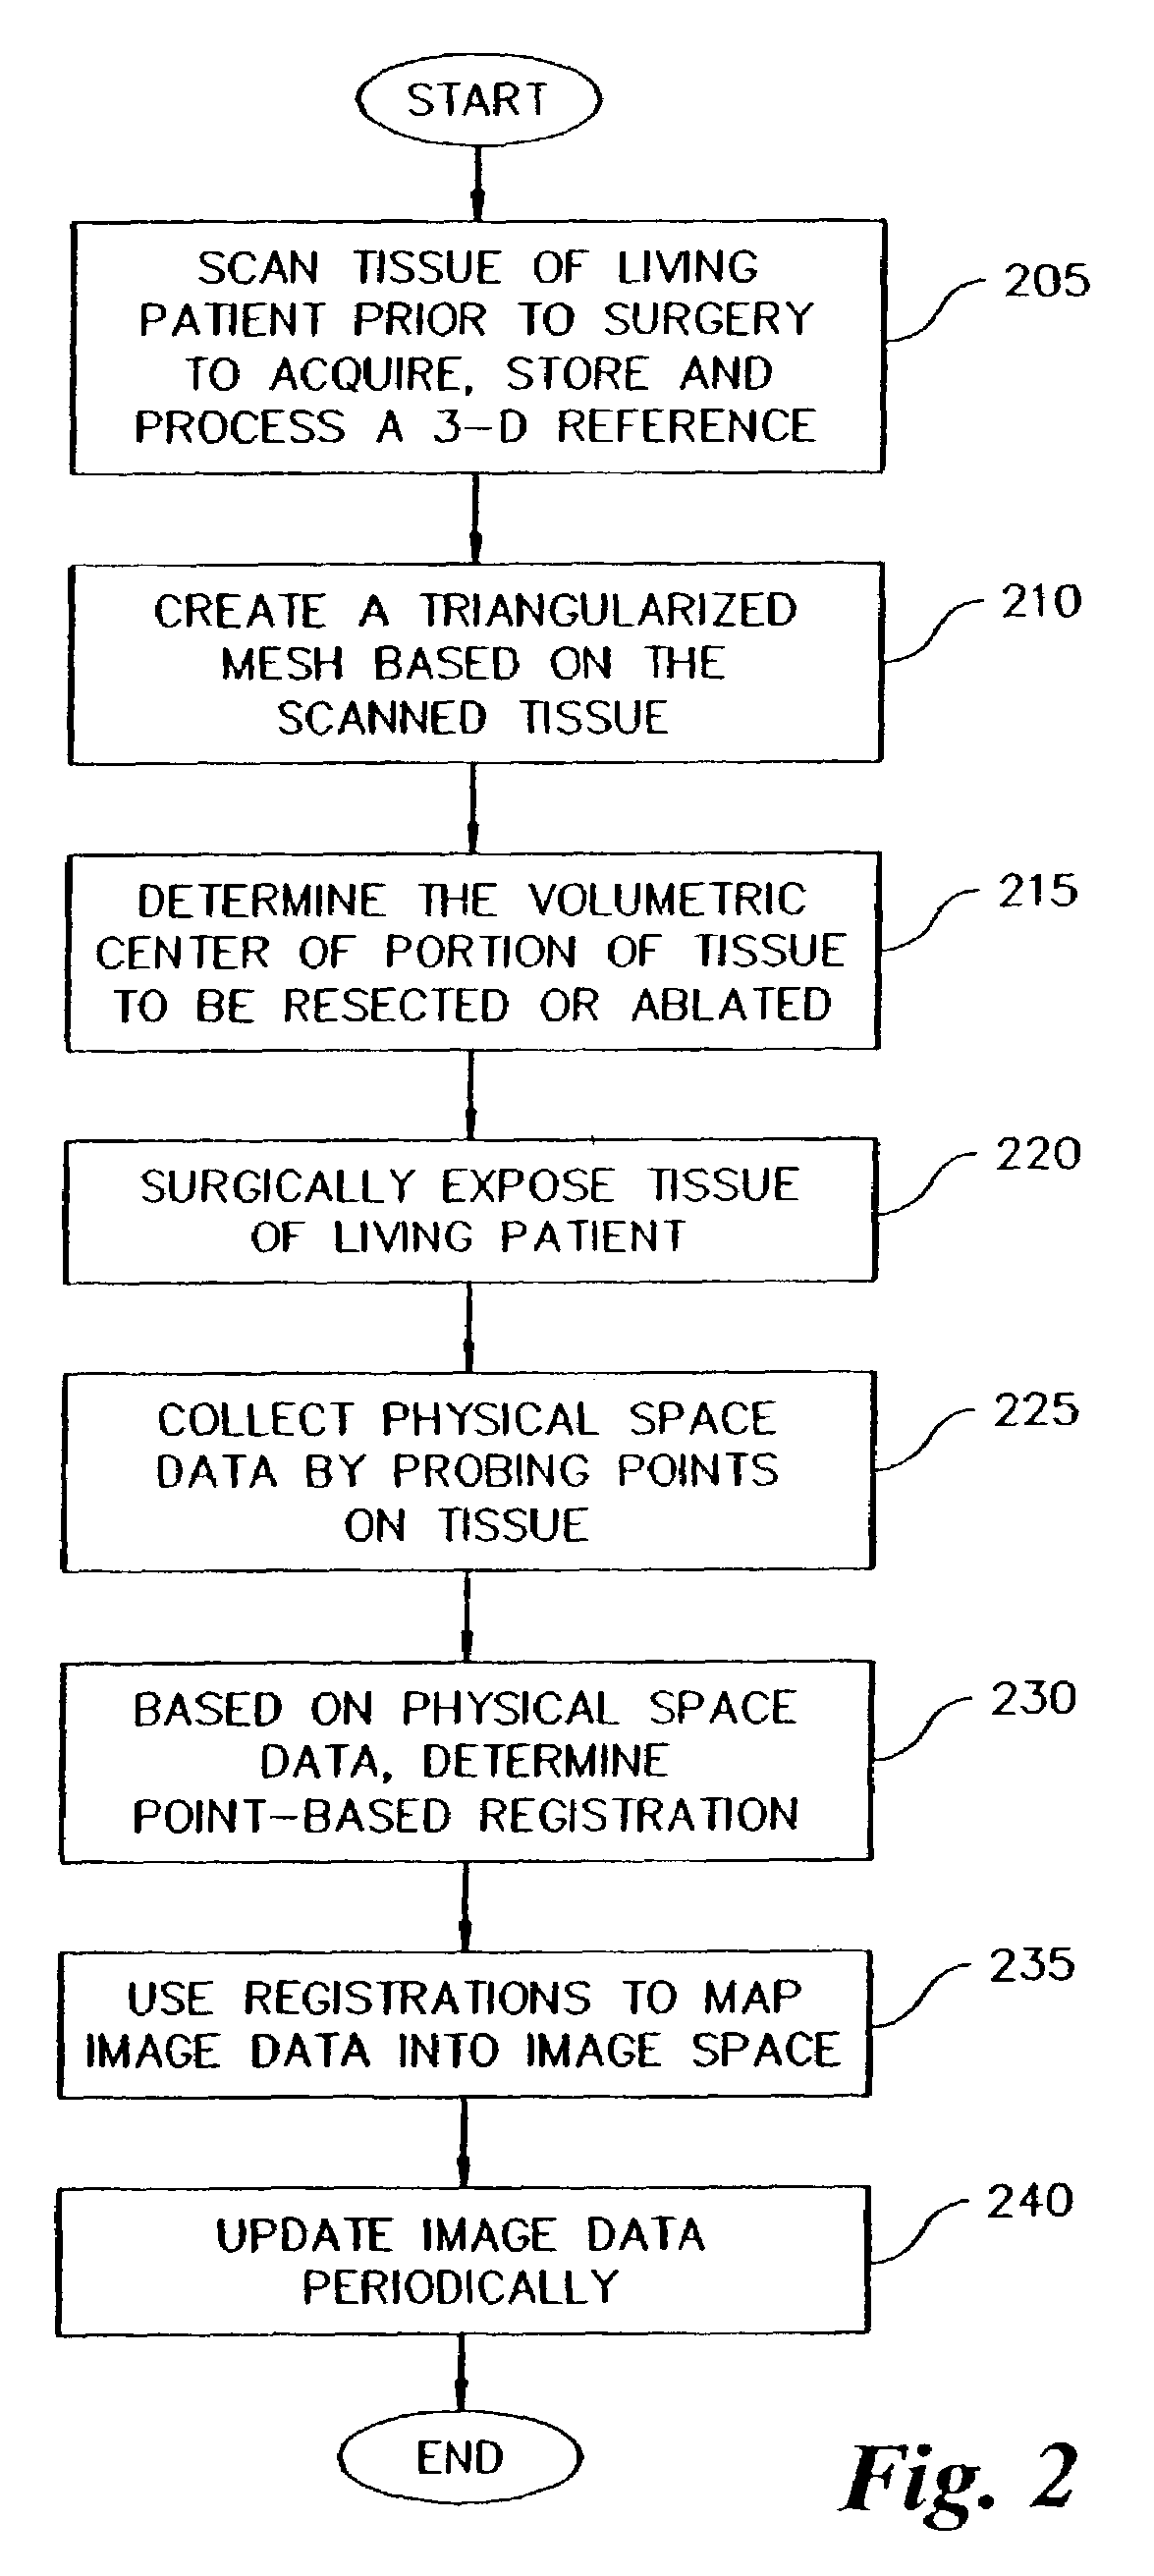 Method and apparatus for collecting and processing physical space data for use while performing image-guided surgery